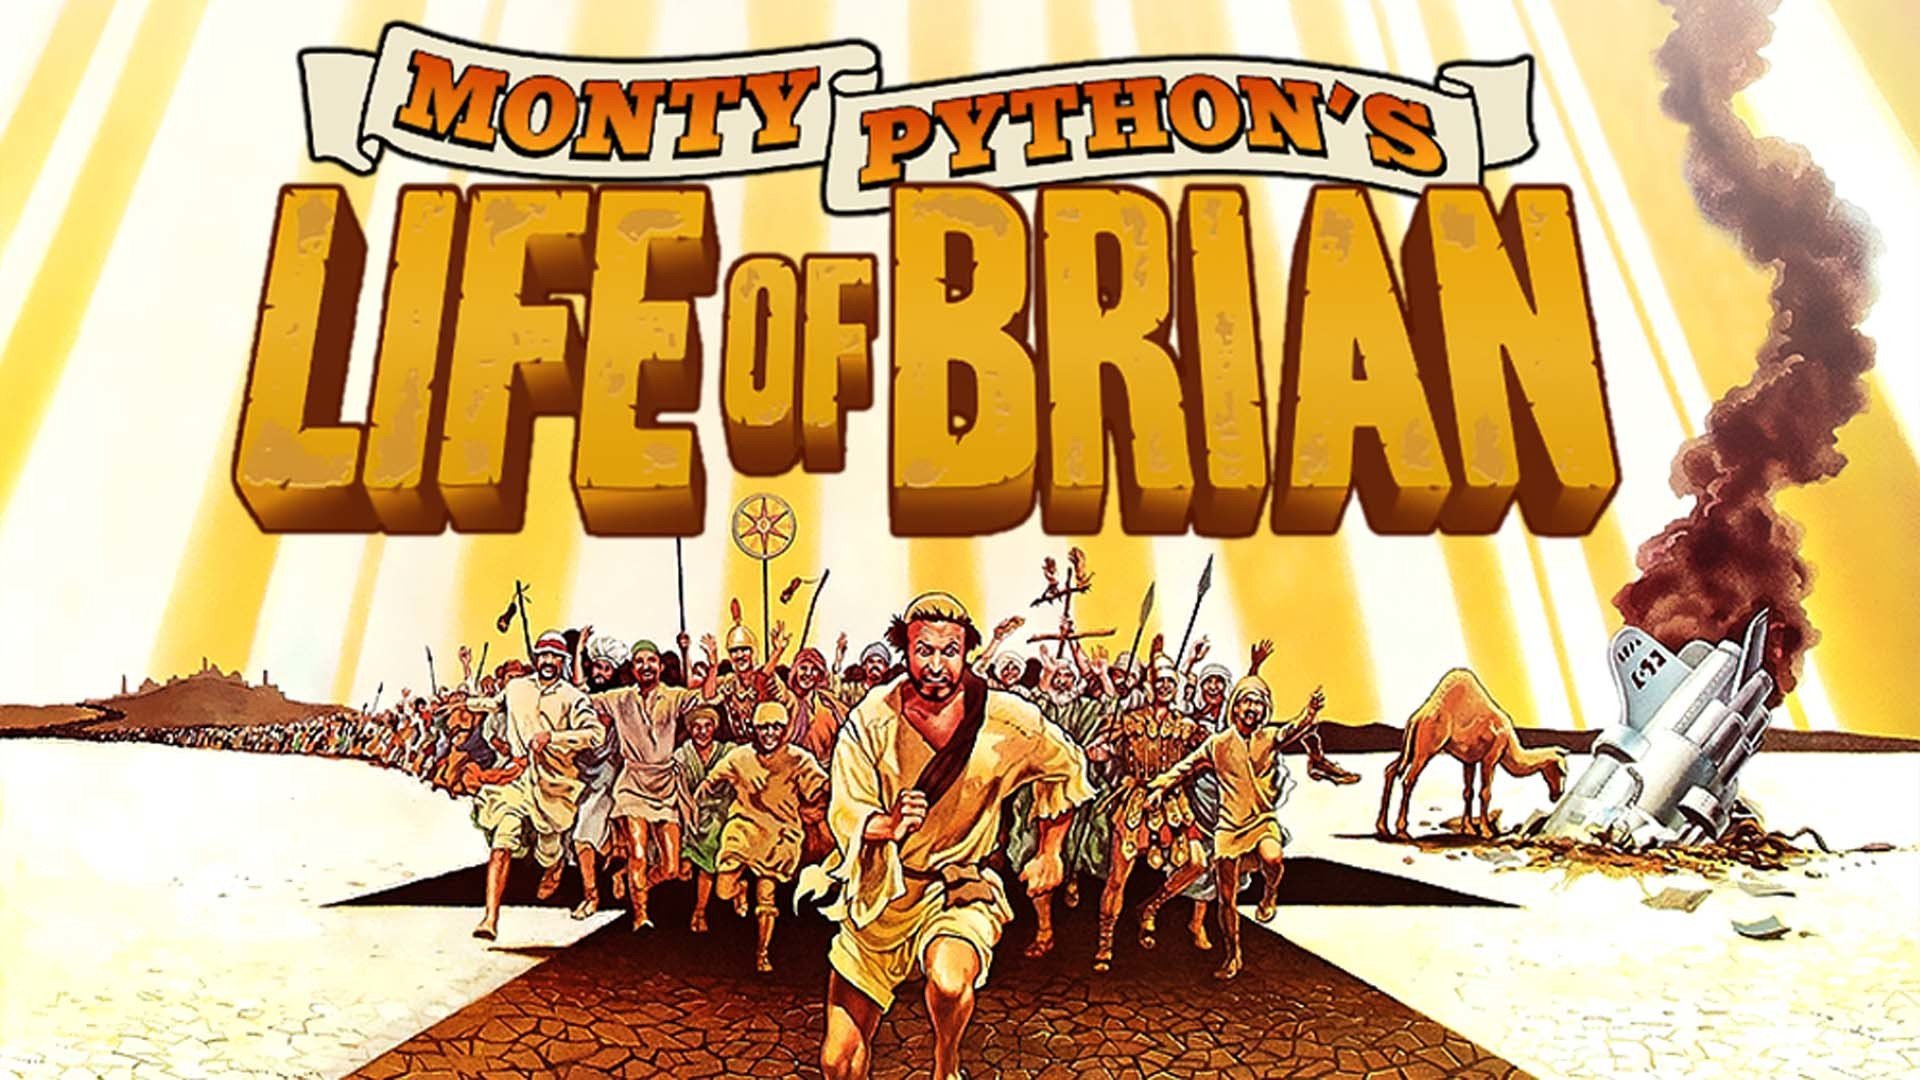 The life of Brian